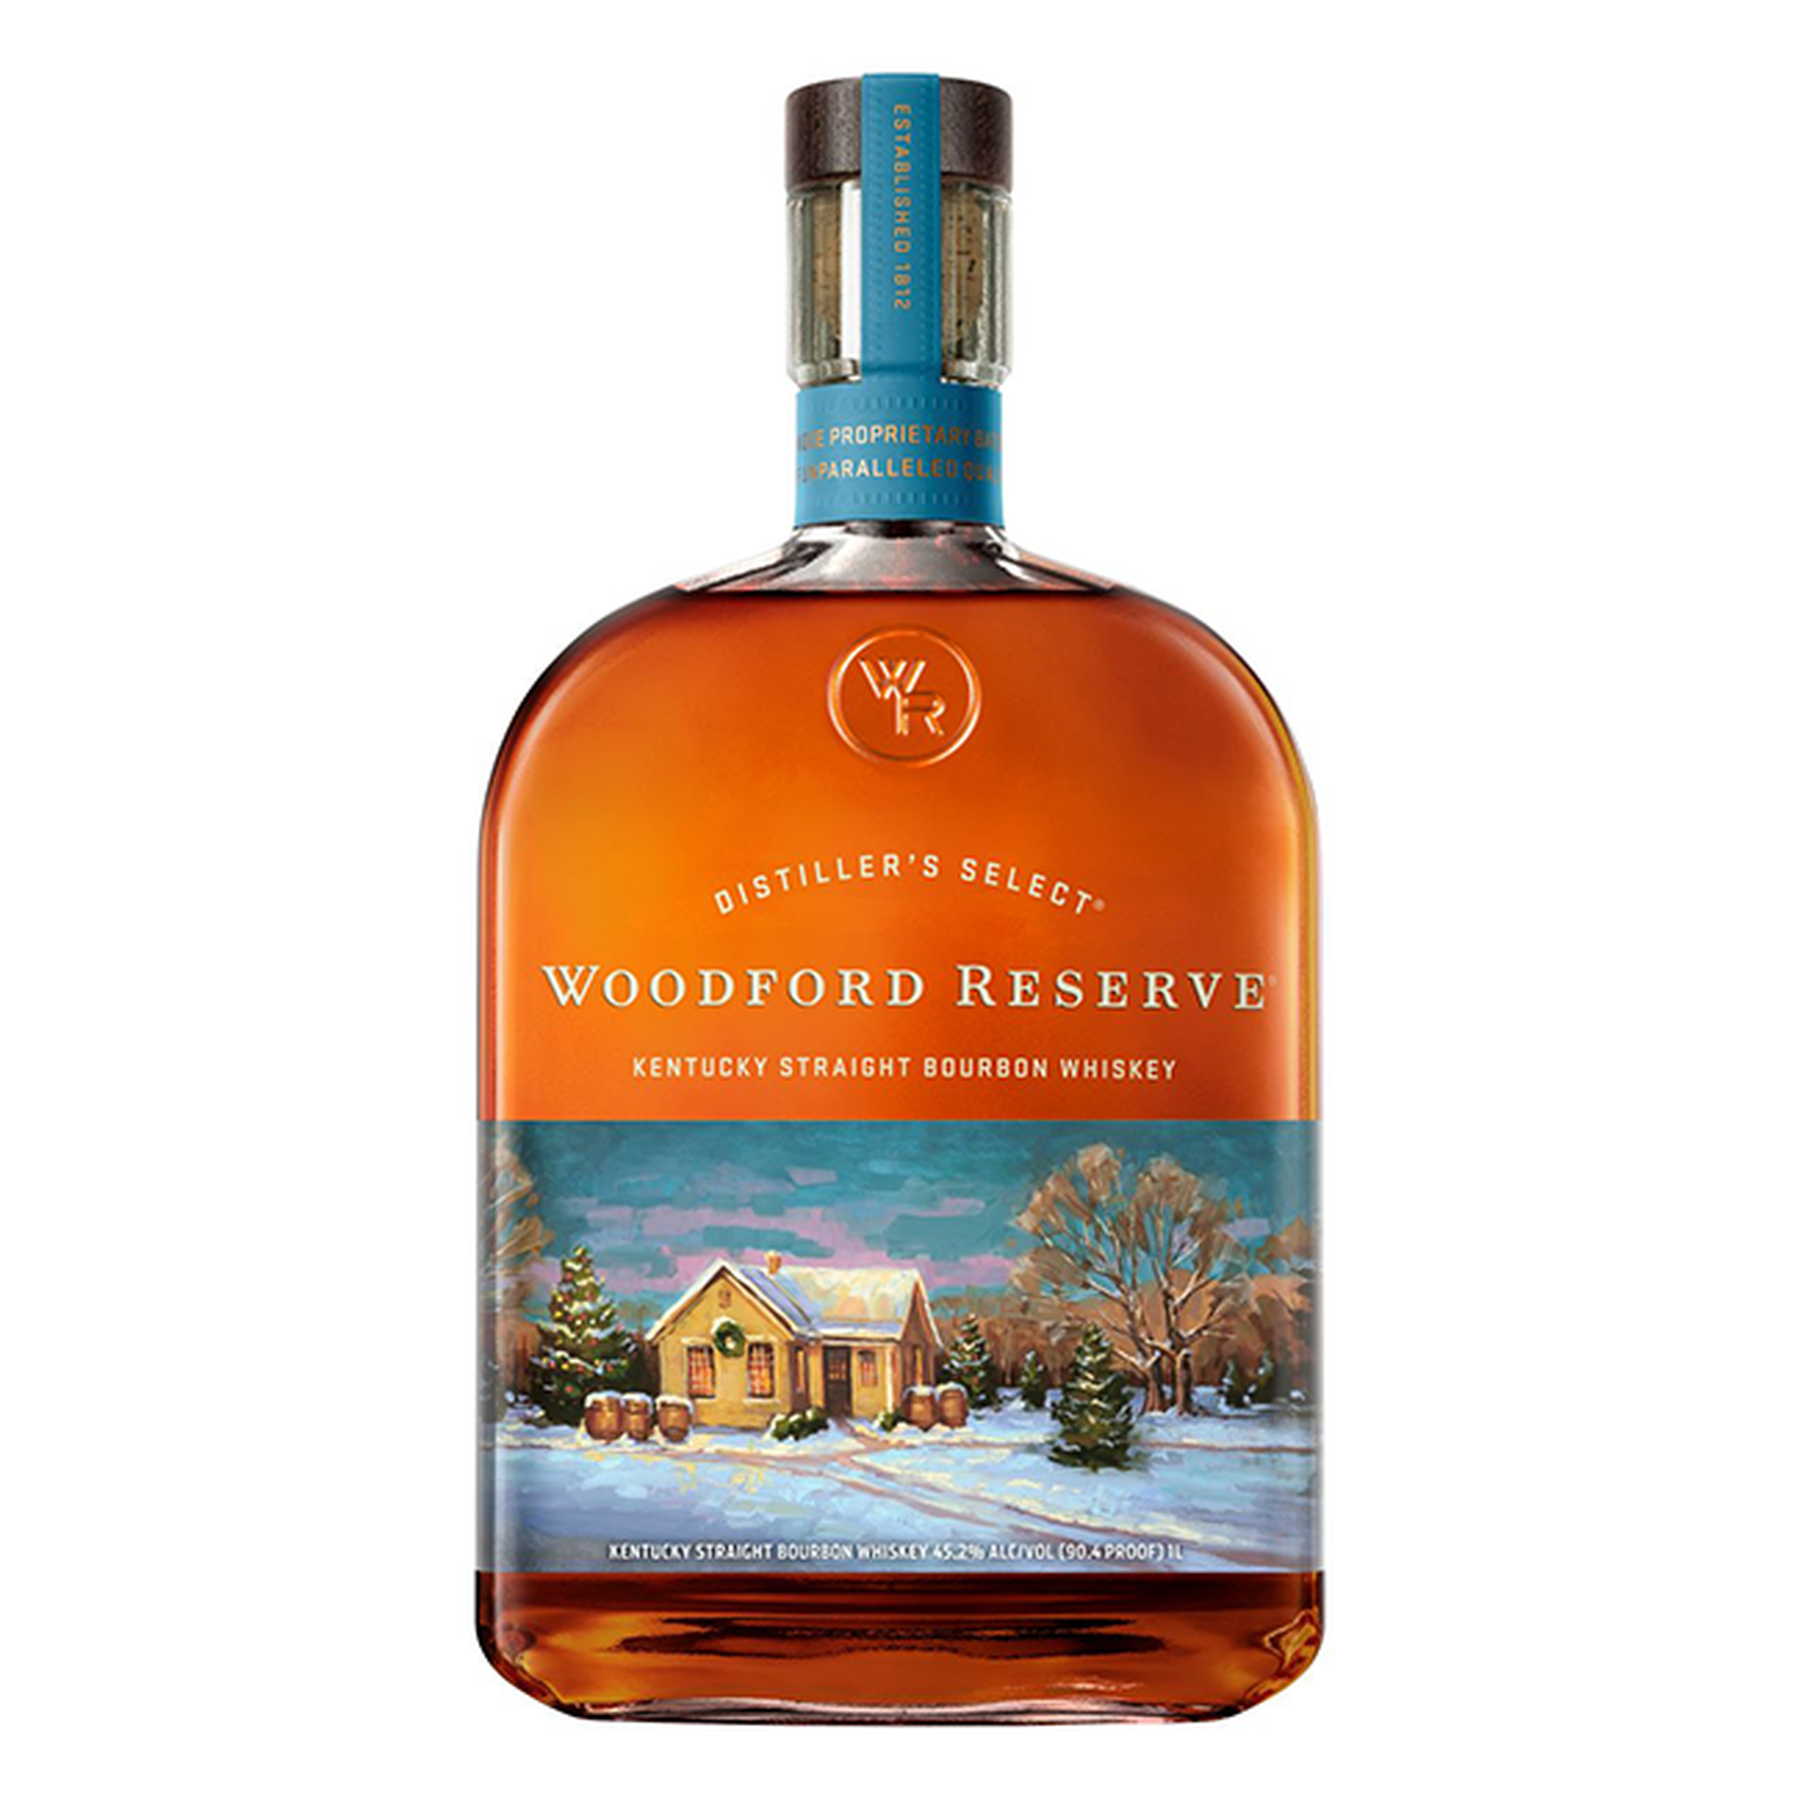 Woodford Reserve Distillers Select Holiday Edition (2018) Kentucky Straight Bourbon Whiskey 1L